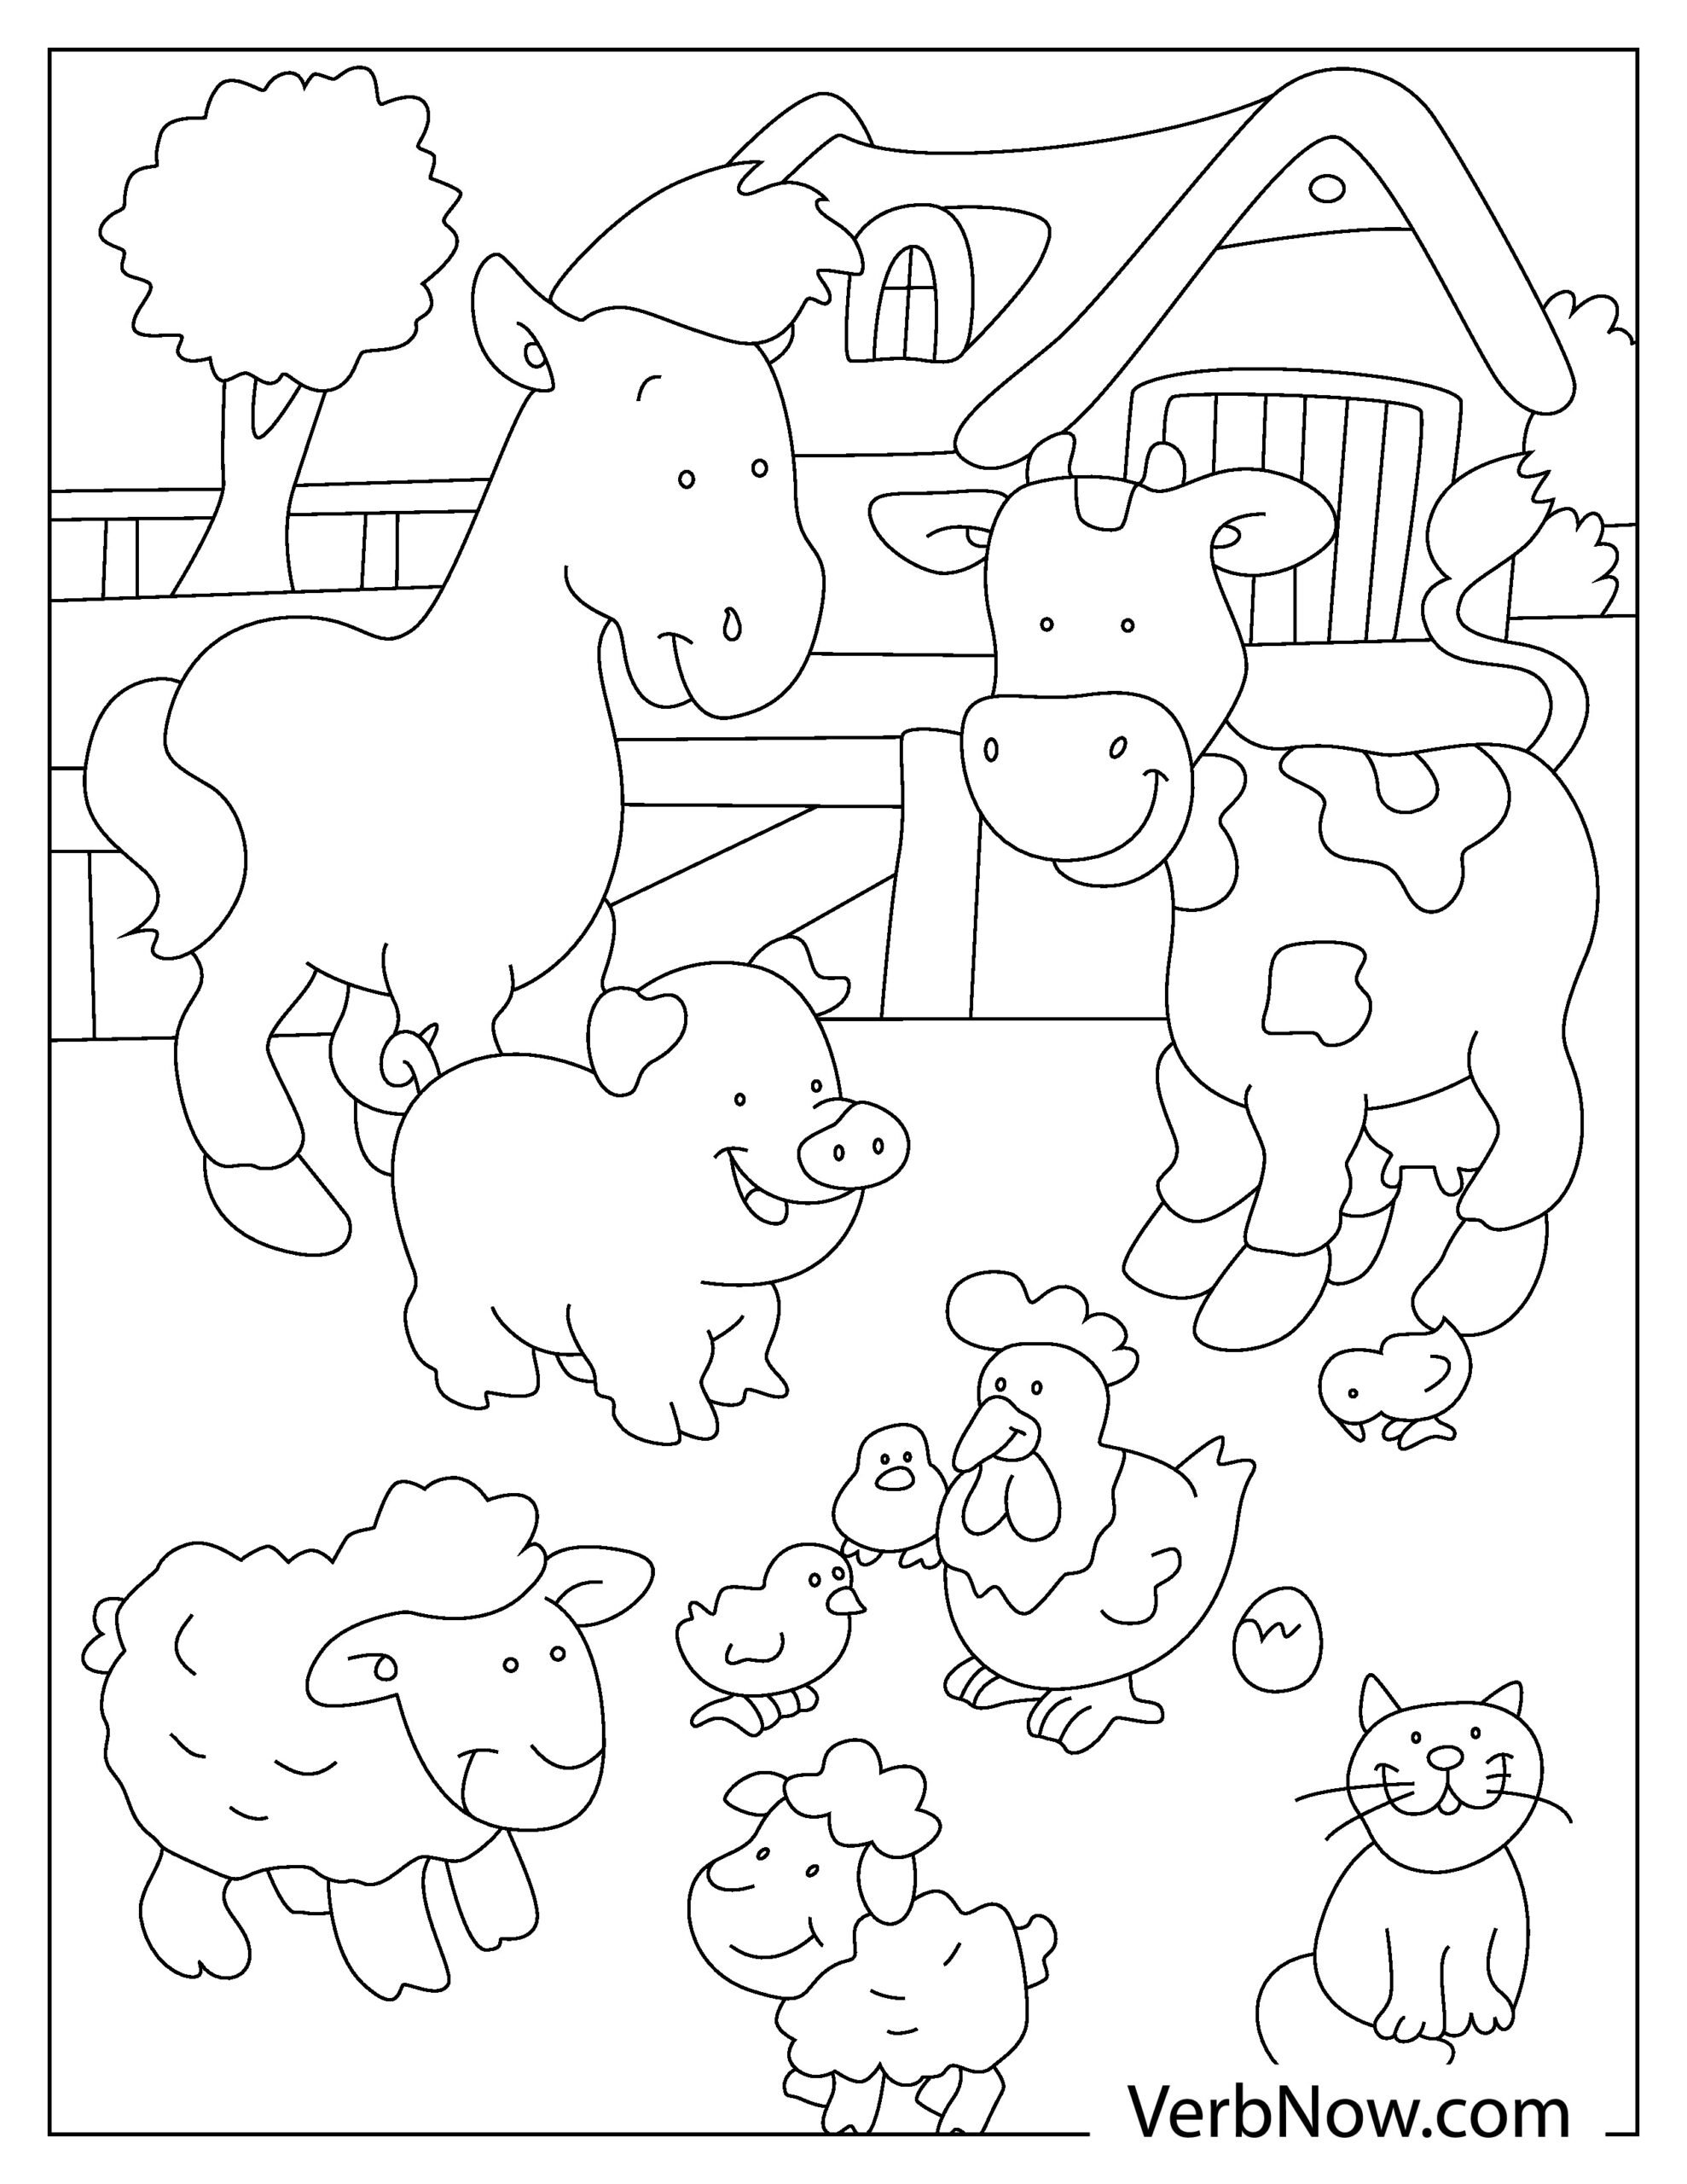 Free farm animals coloring pages book for download printable pdf